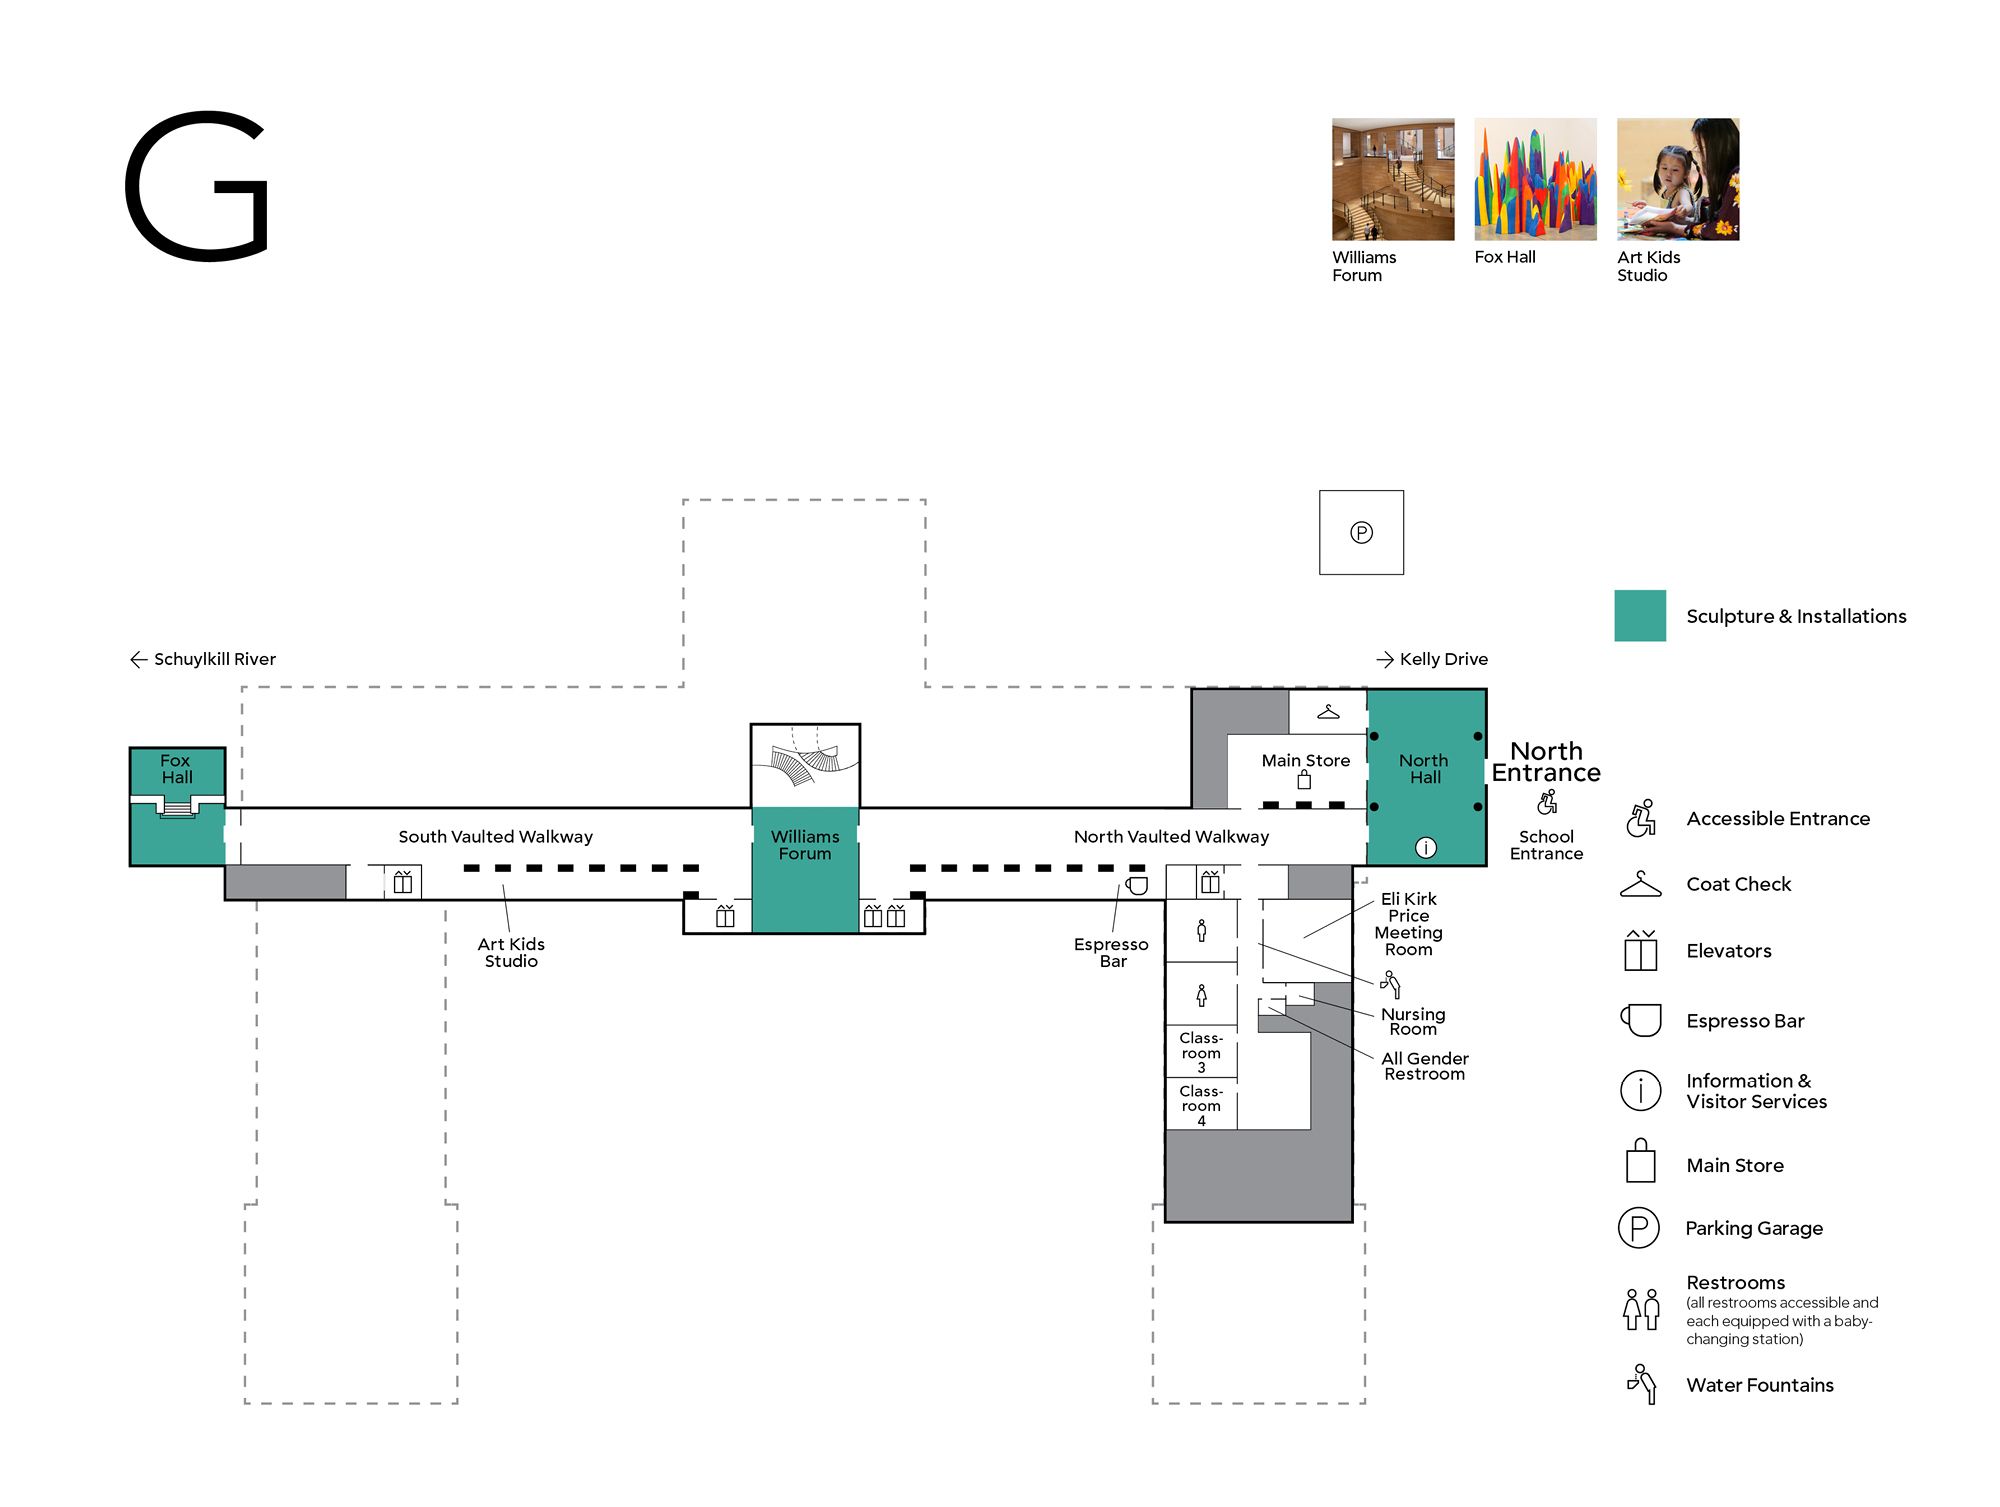 A map showing the elevated ground floor layout of the Philadelphia Museum of Art.